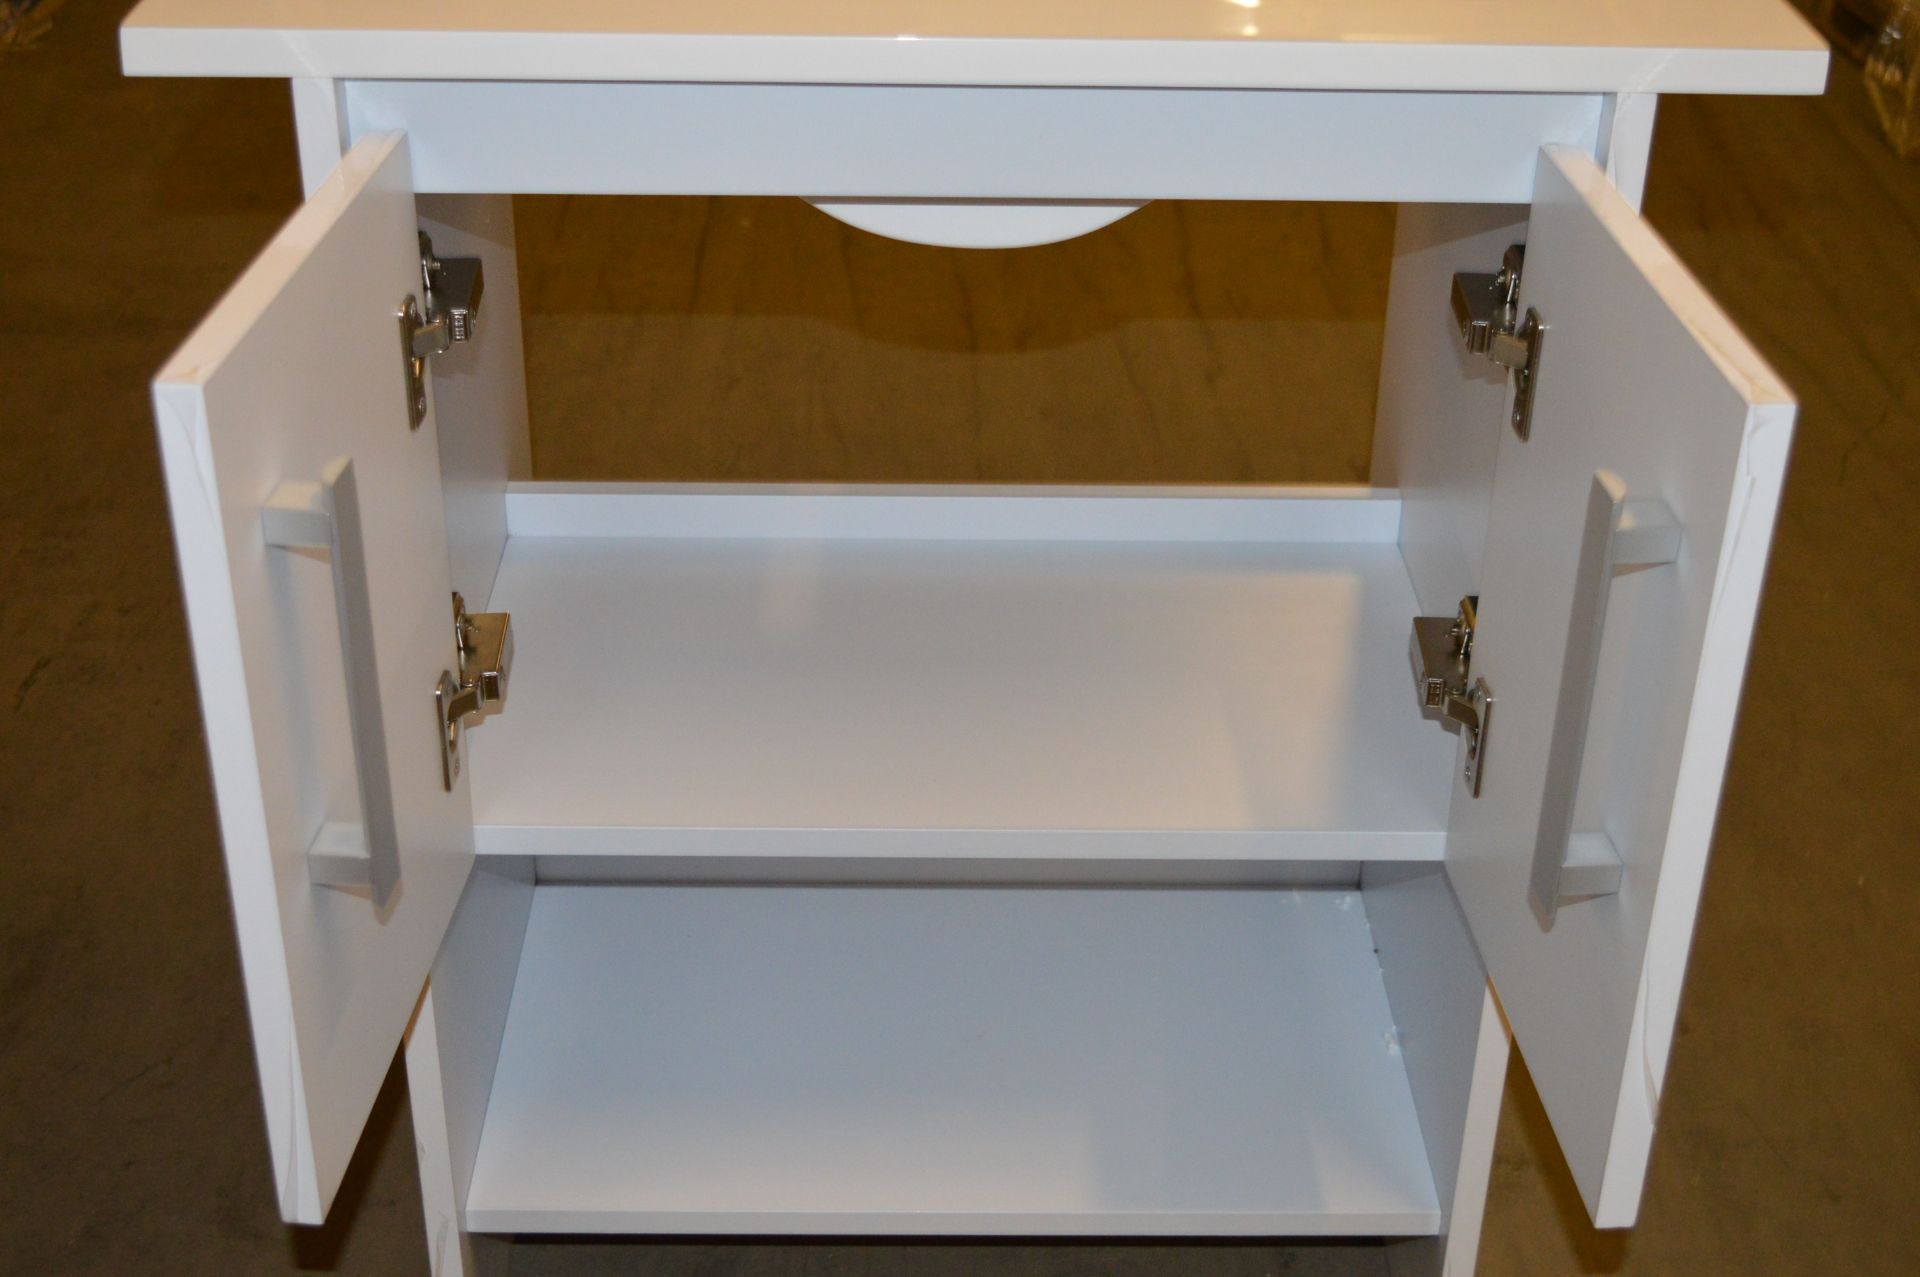 1 x Vogue Onyx White Gloss 600mm Bathroom Vanity Unit With Wash Basin - Vinyl Wrap Coating for - Image 9 of 11